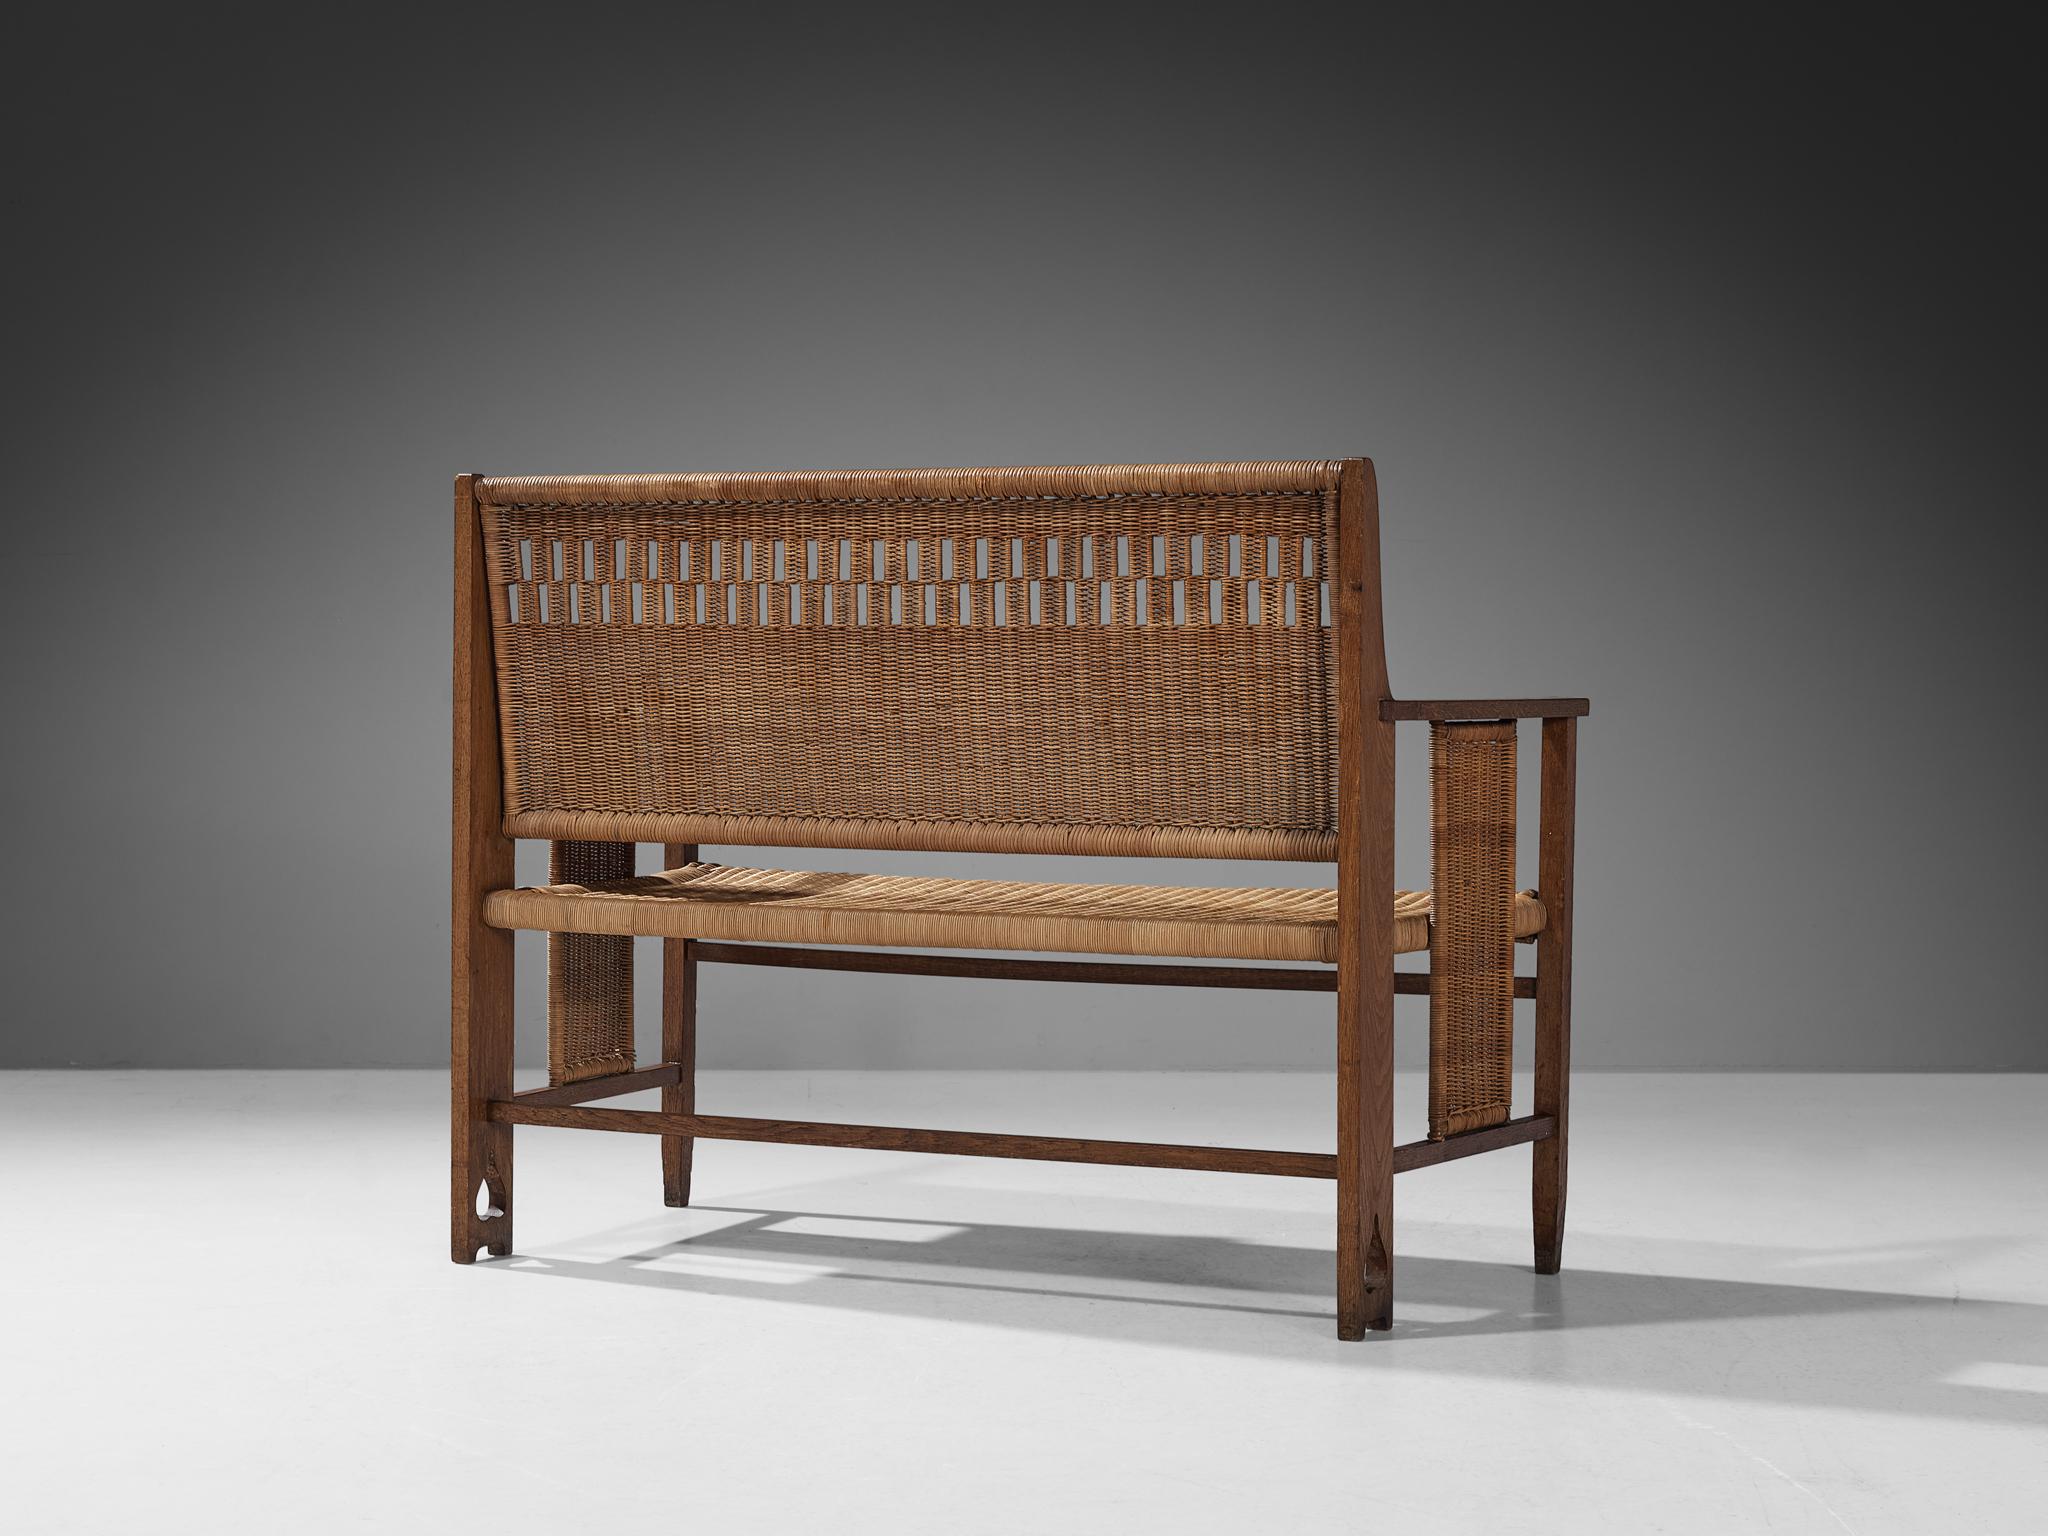 Early 20th Century Arts & Crafts Bench in Oak and Cane